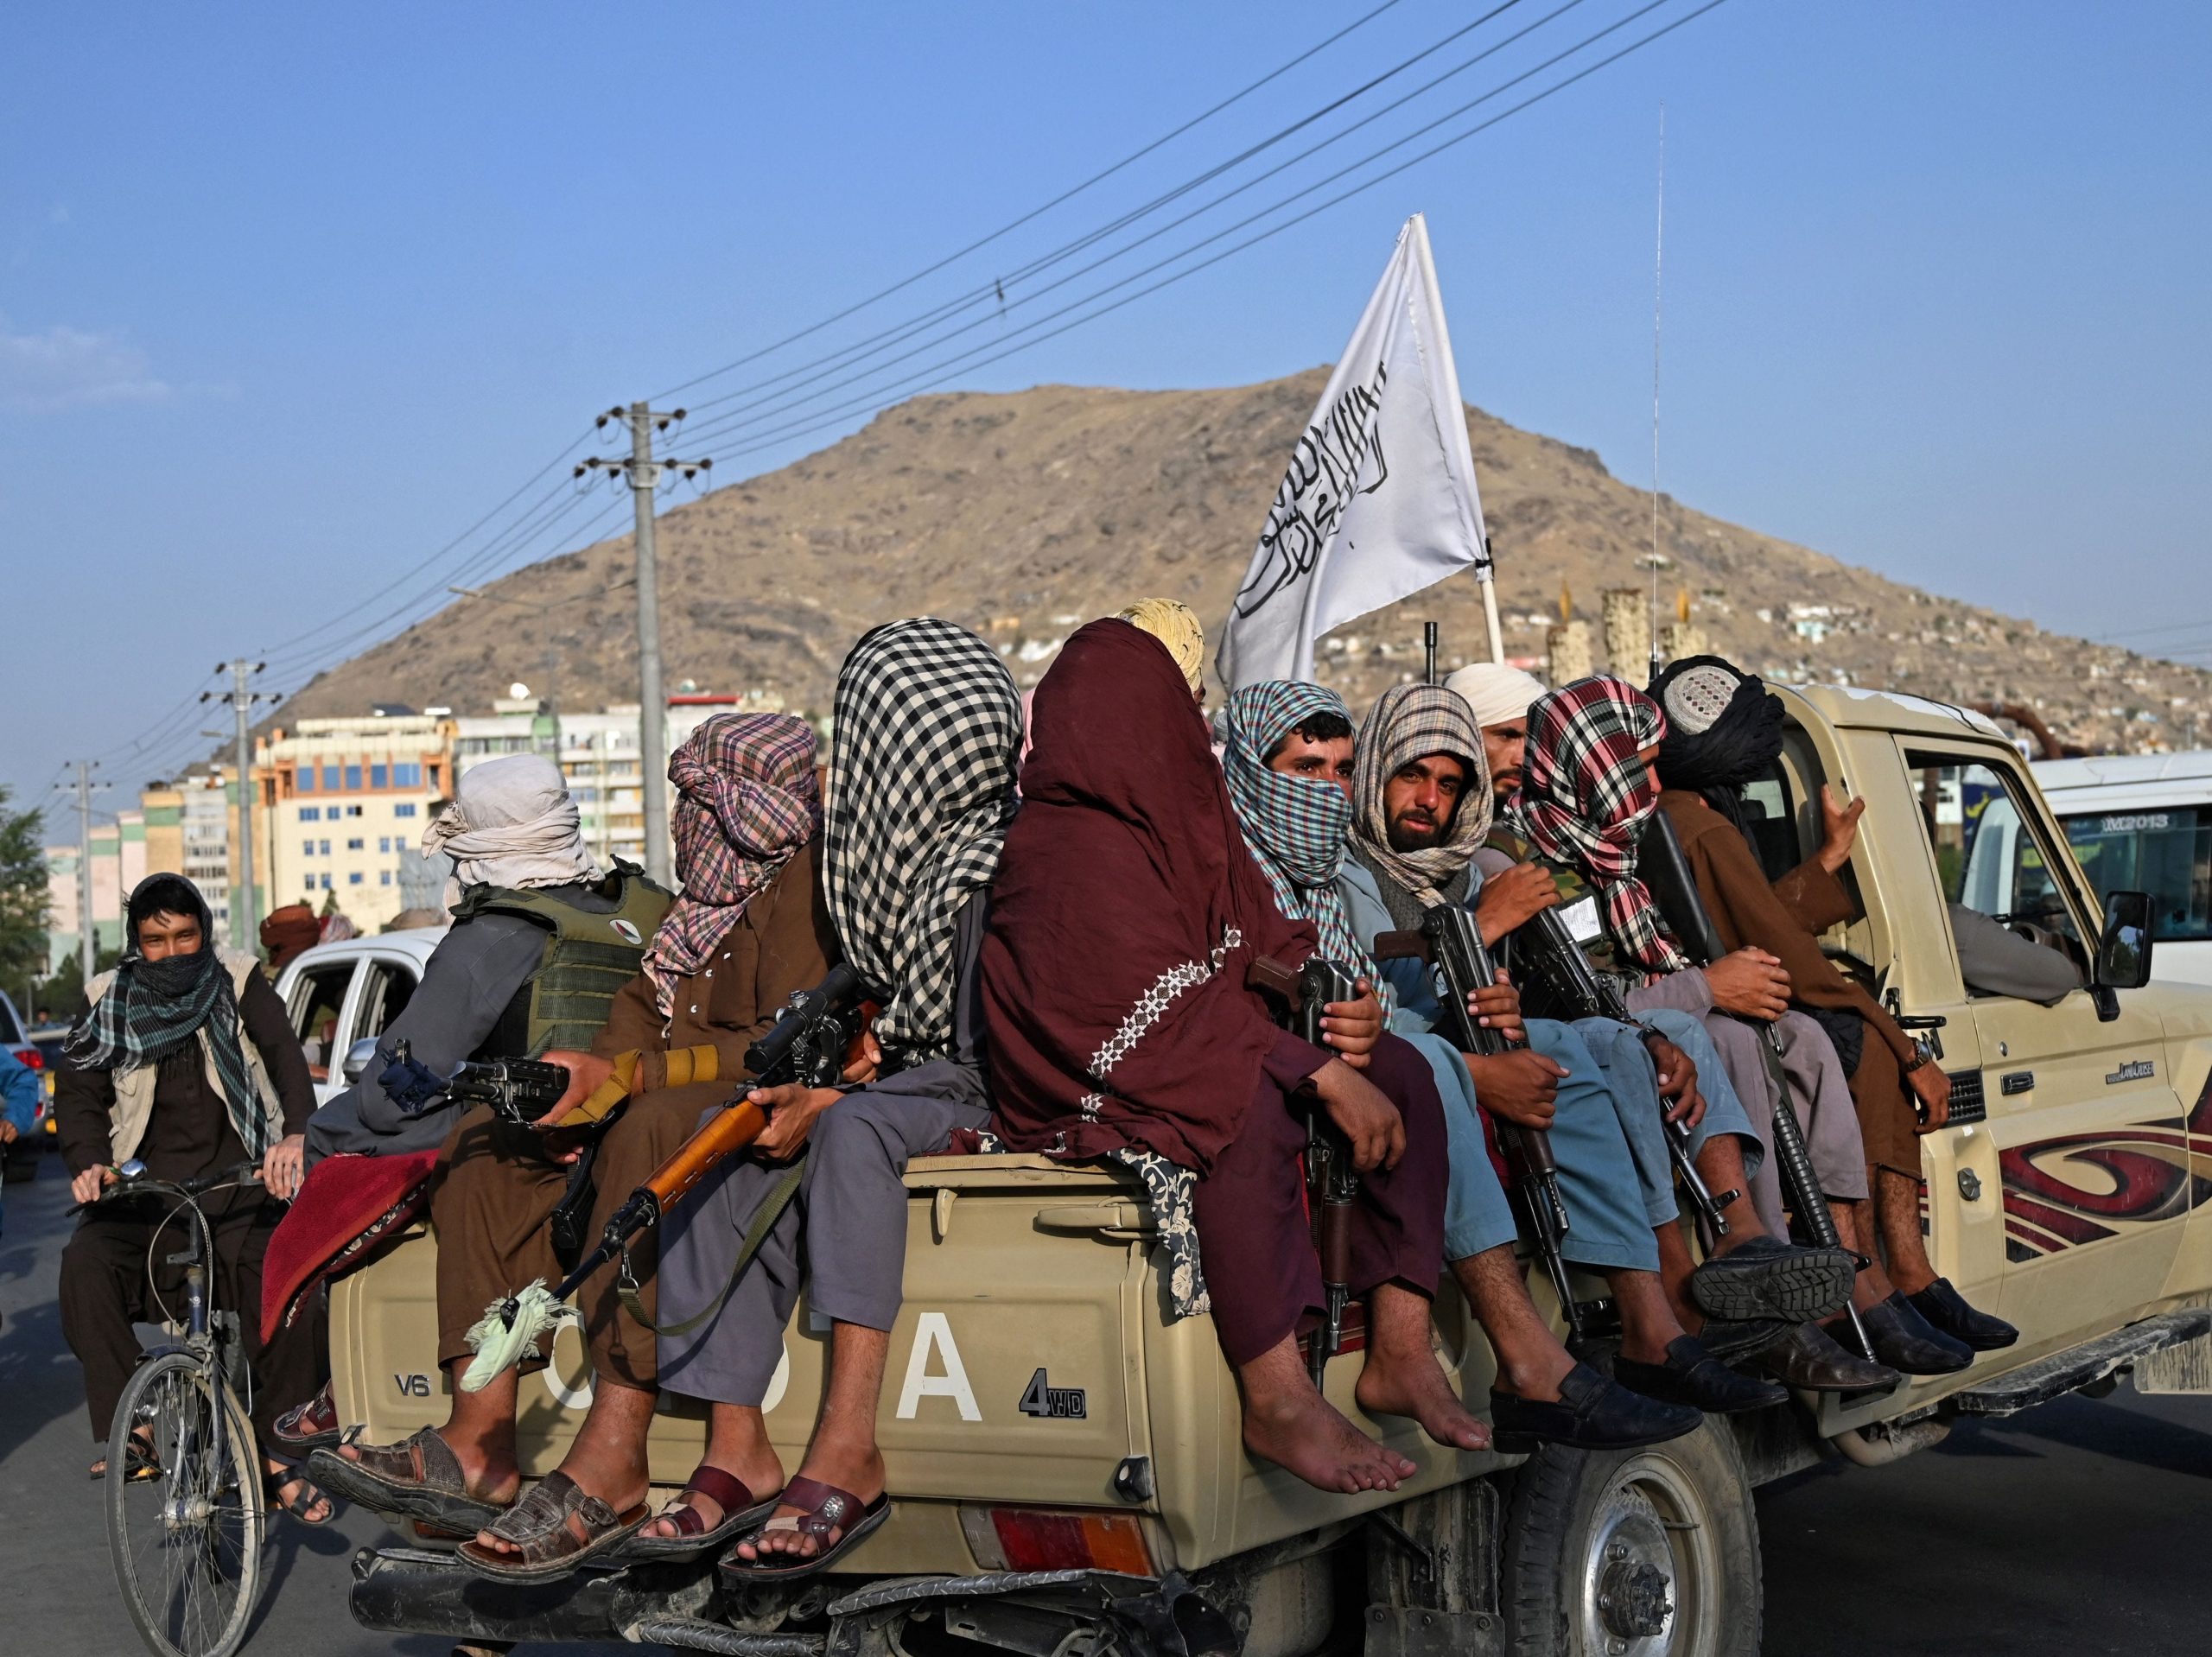 Taliban fighters in a vehicle patrol the streets of Kabul on August 23, 2021, with their armed forces patrolling the streets and manning checkpoints.